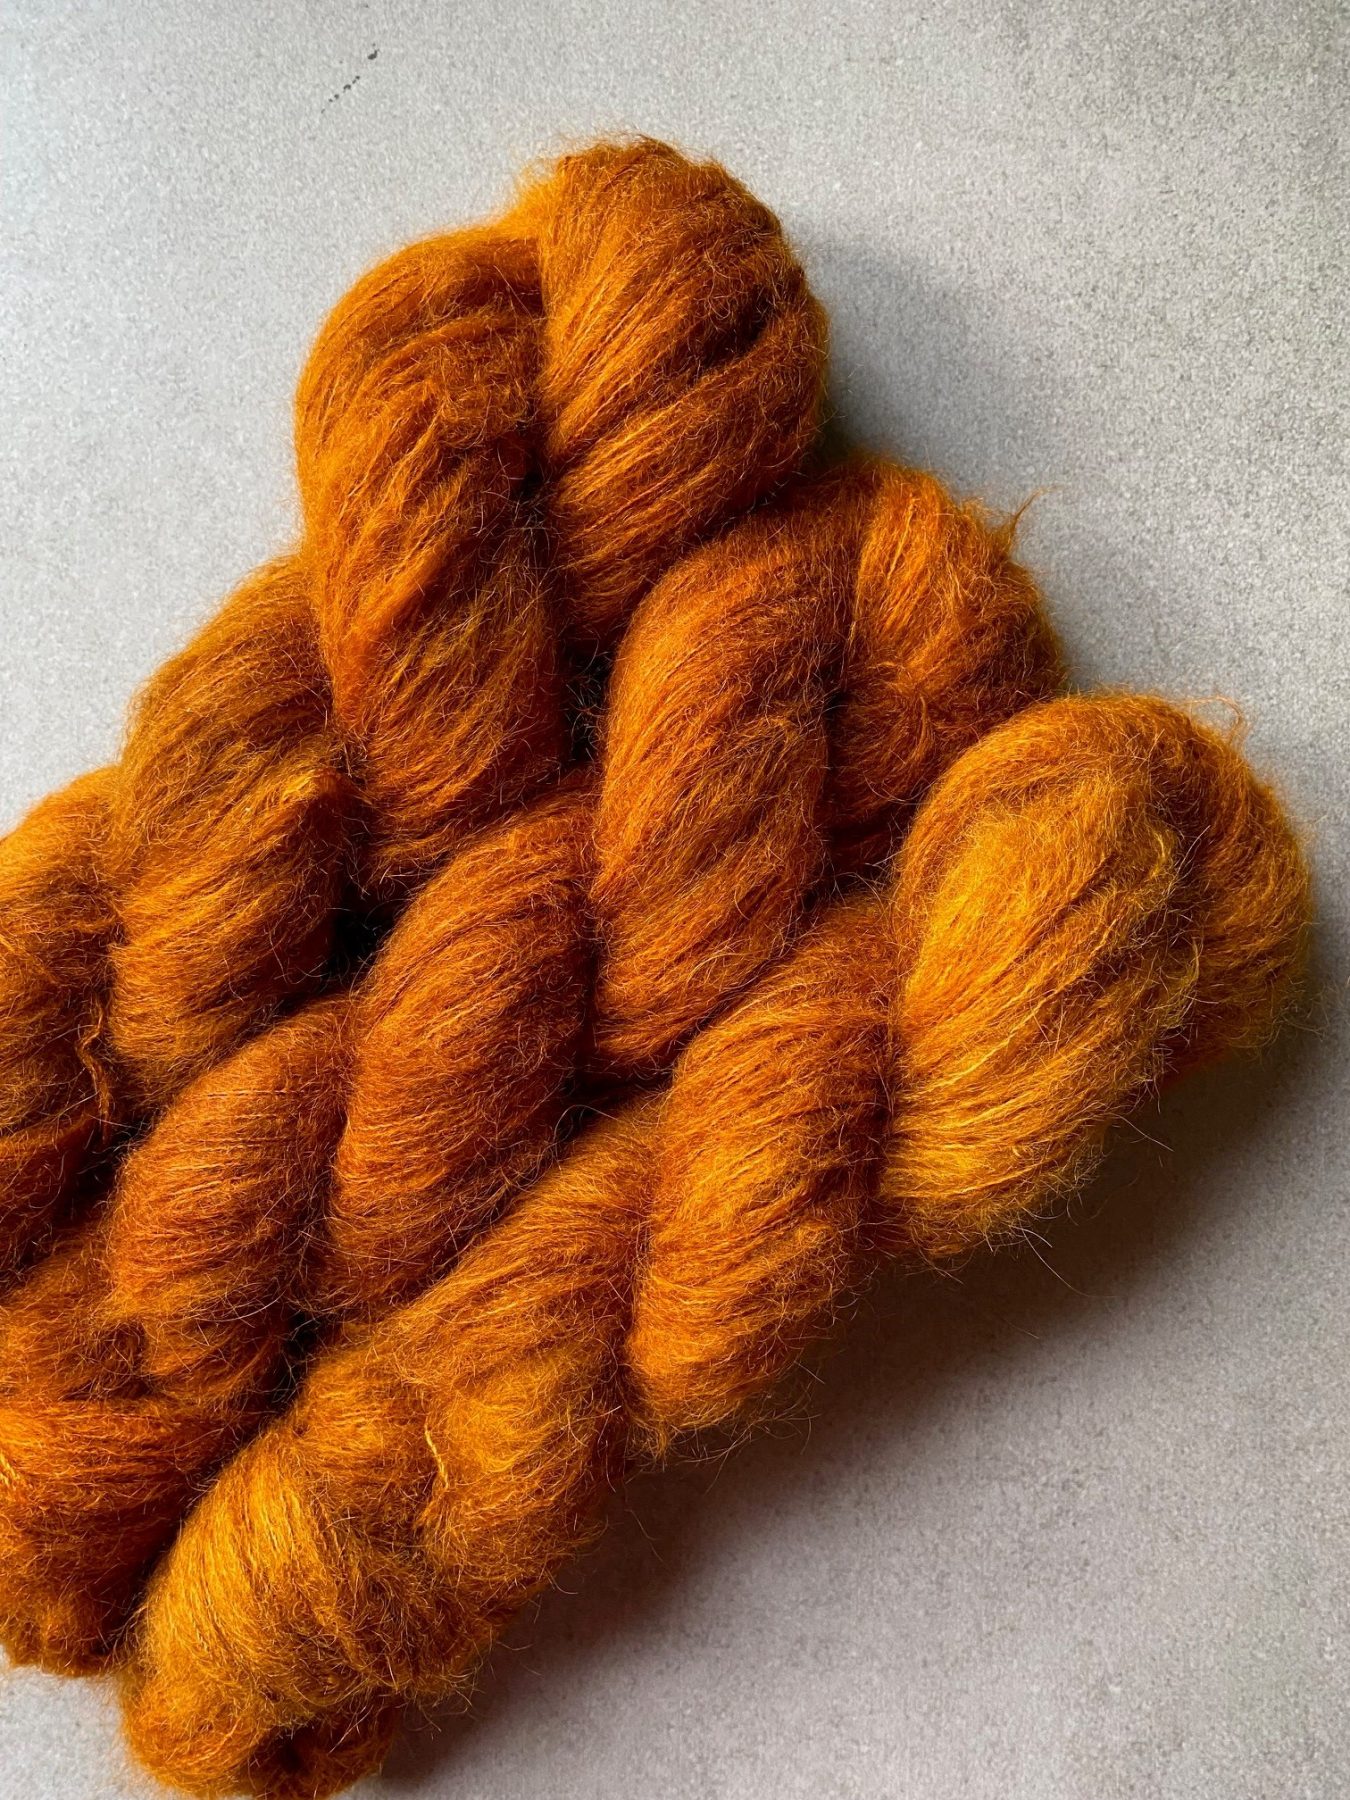 Rusty Nuts - Lace Weight - Hand Dyed Yarn